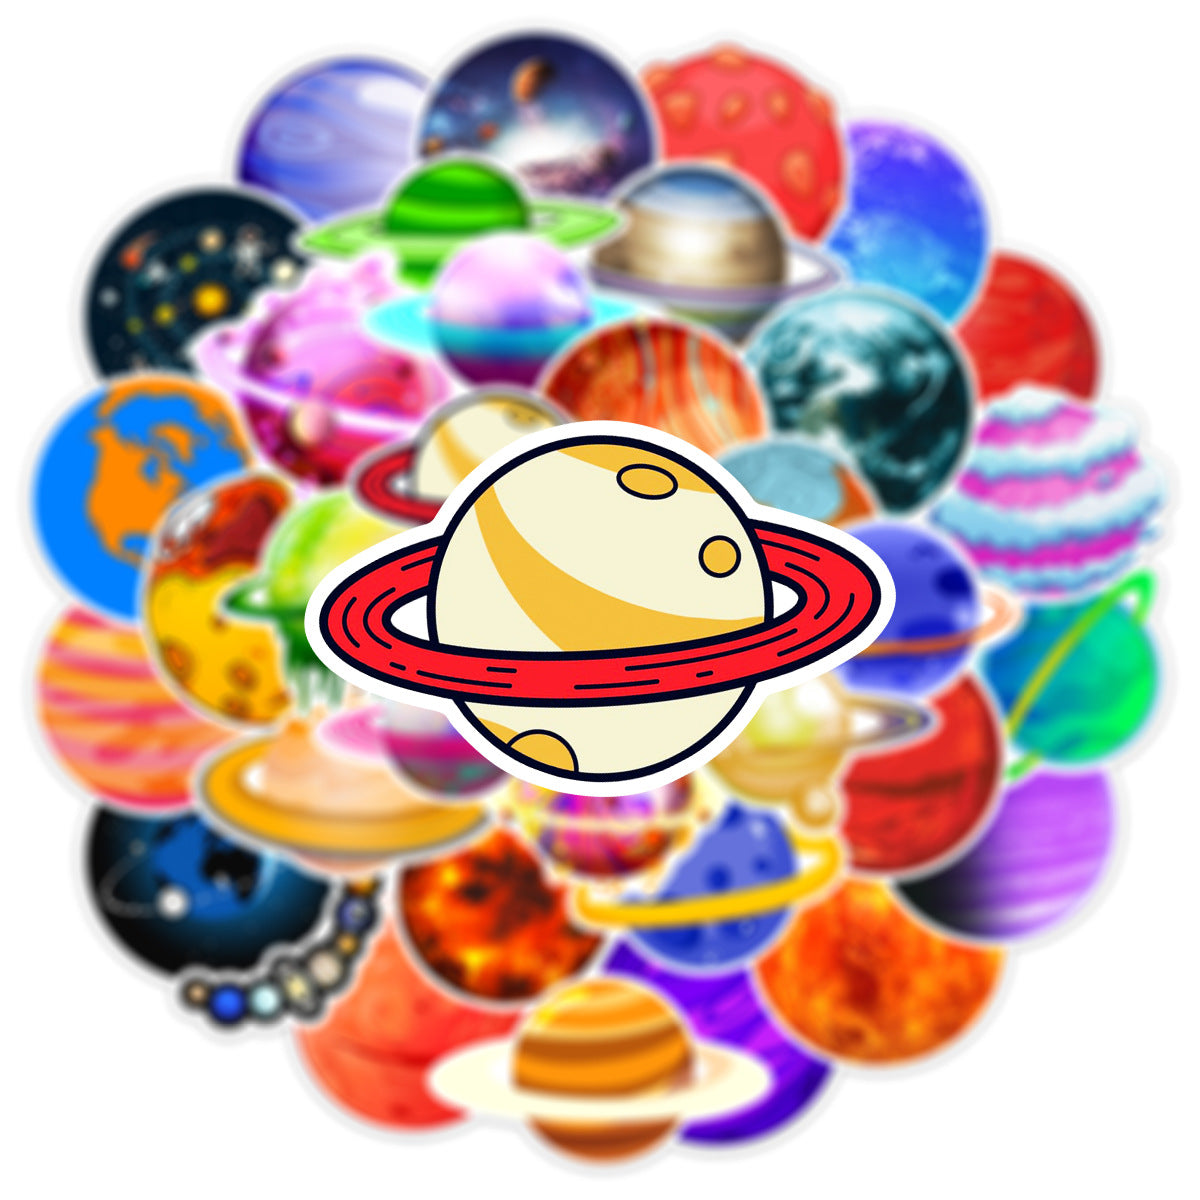 50 Cosmic Planets Galaxies Doodles Computer Luggage Stickers